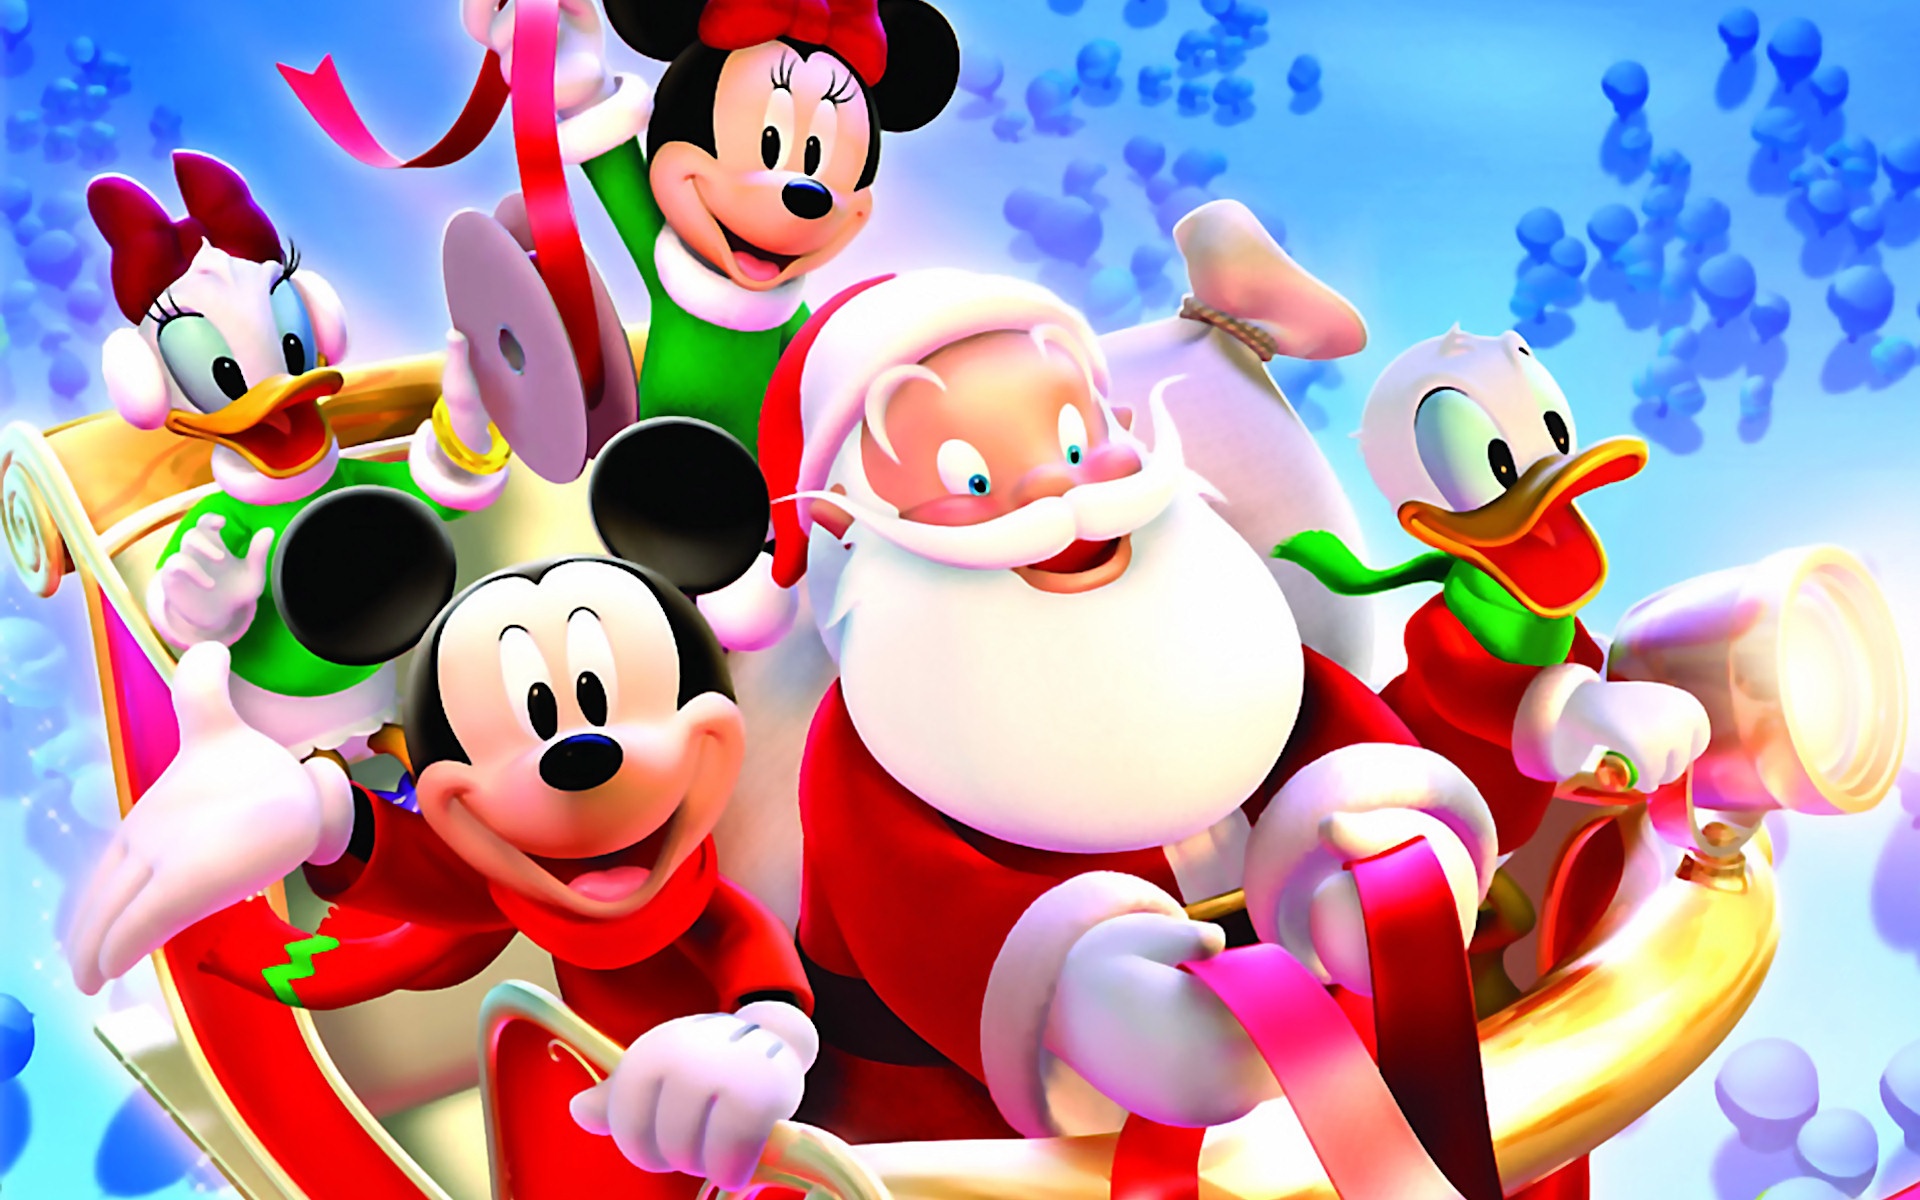 Disney Merry Christmas And Happy New Year - HD Wallpaper 